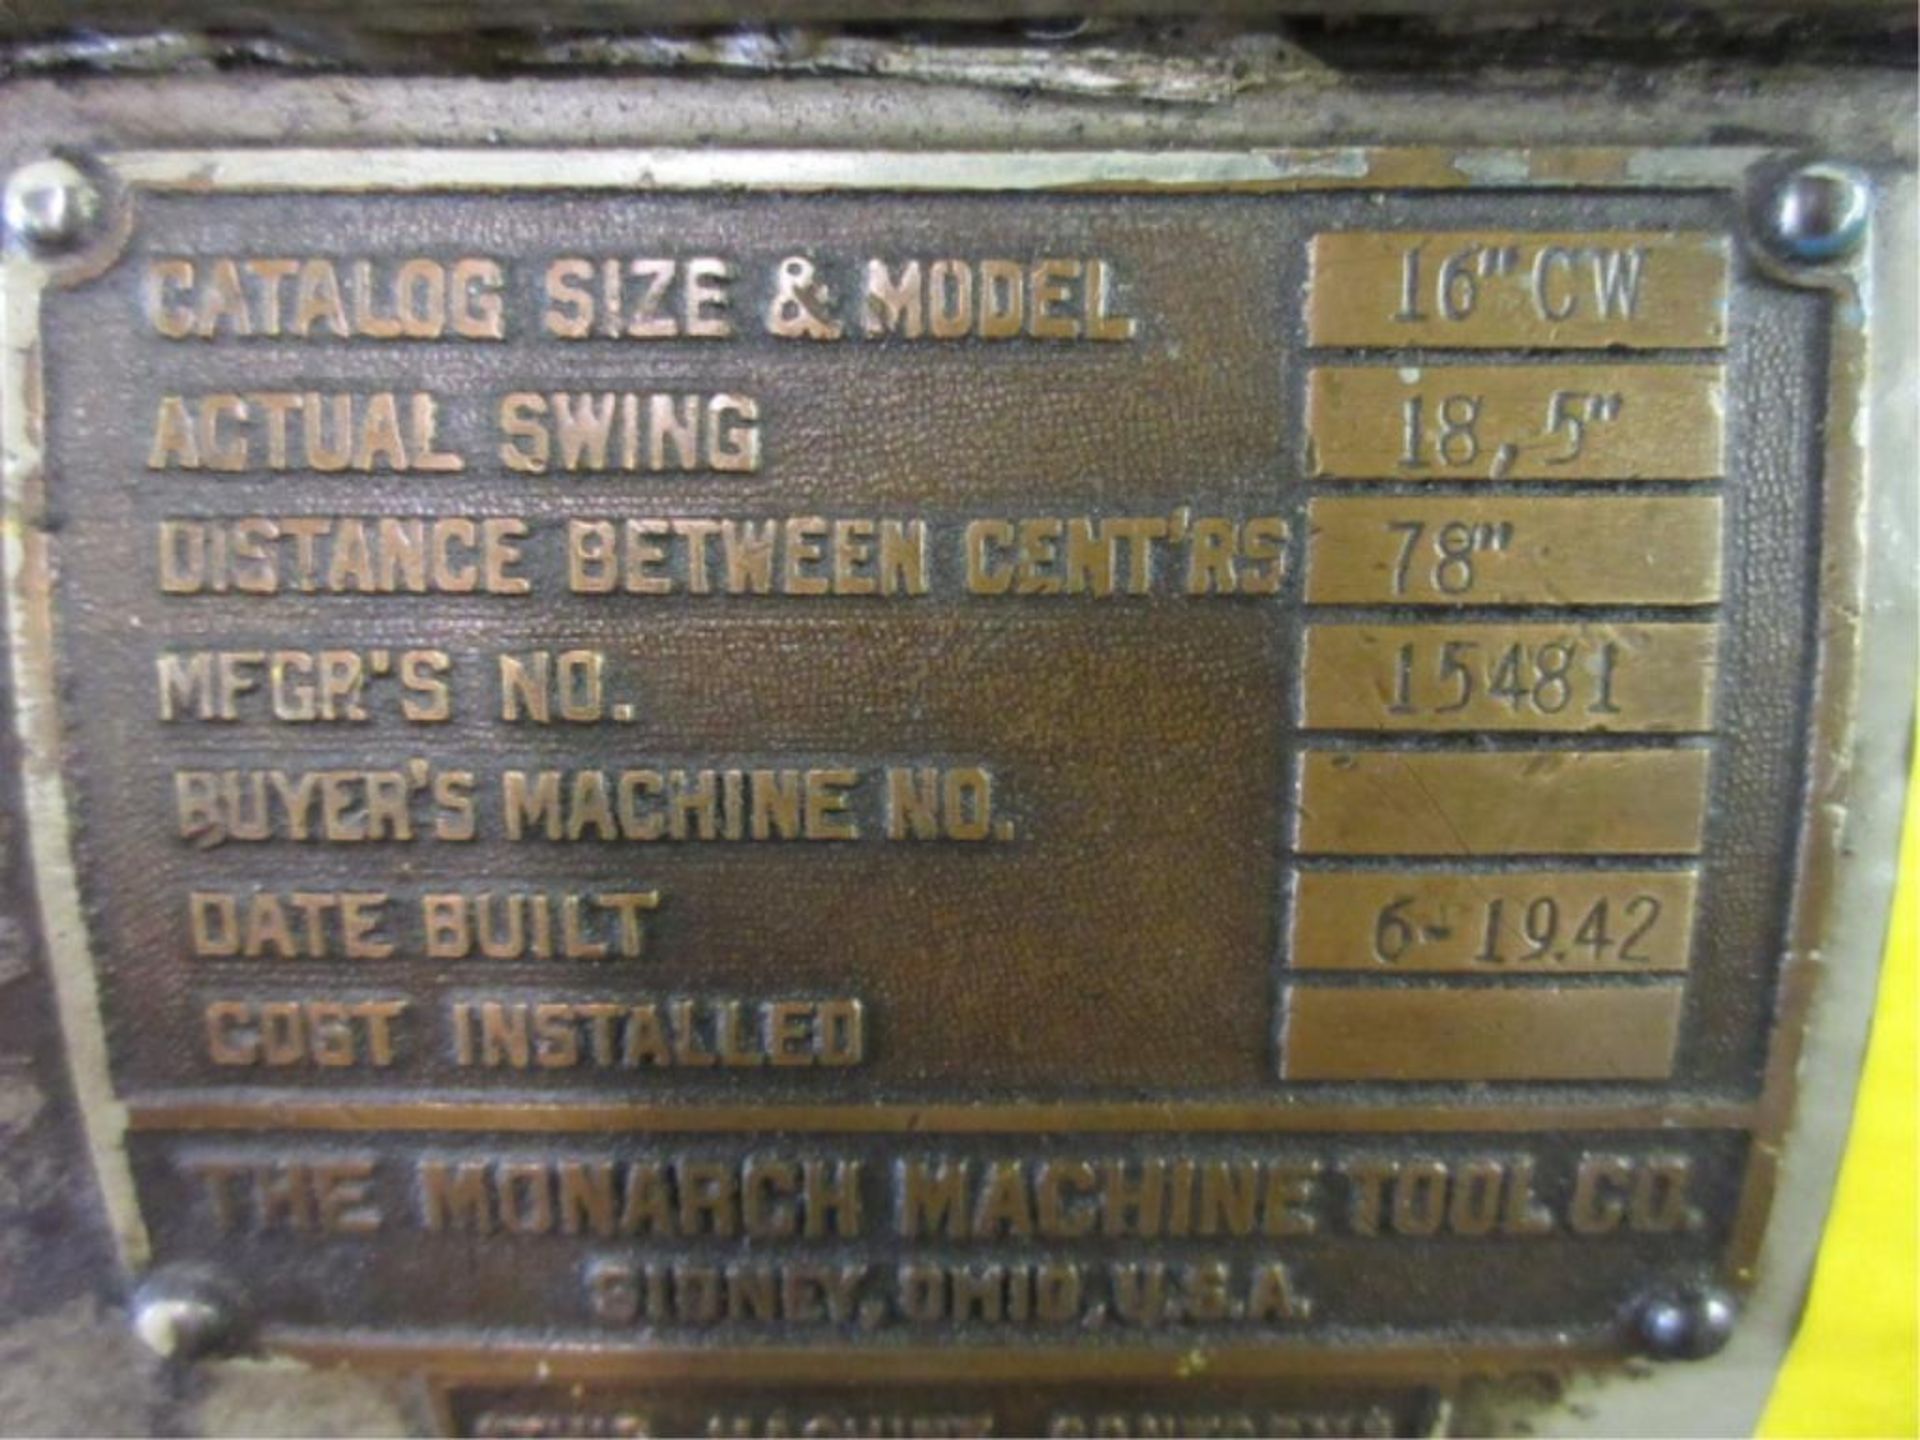 Monarch Engine Lathe. Monarch 16"CW Engine Lathe, (1942), actual swing 18.5, distance between - Image 5 of 8